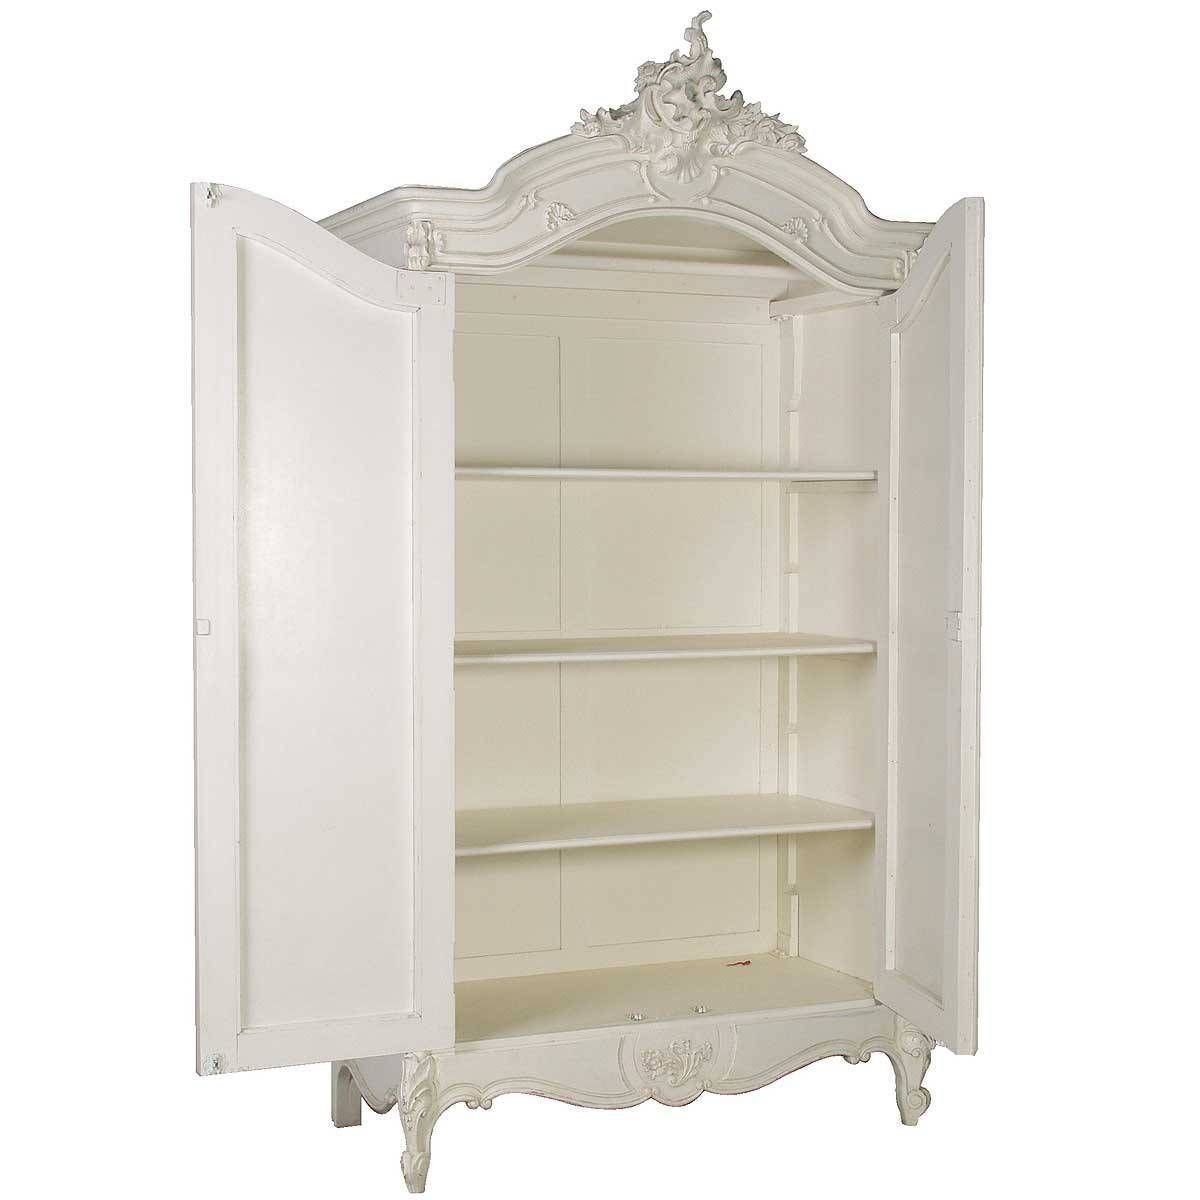 Provencal 2 Door Mirrored French Armoire | Armoire Regarding French Wardrobes (View 10 of 15)